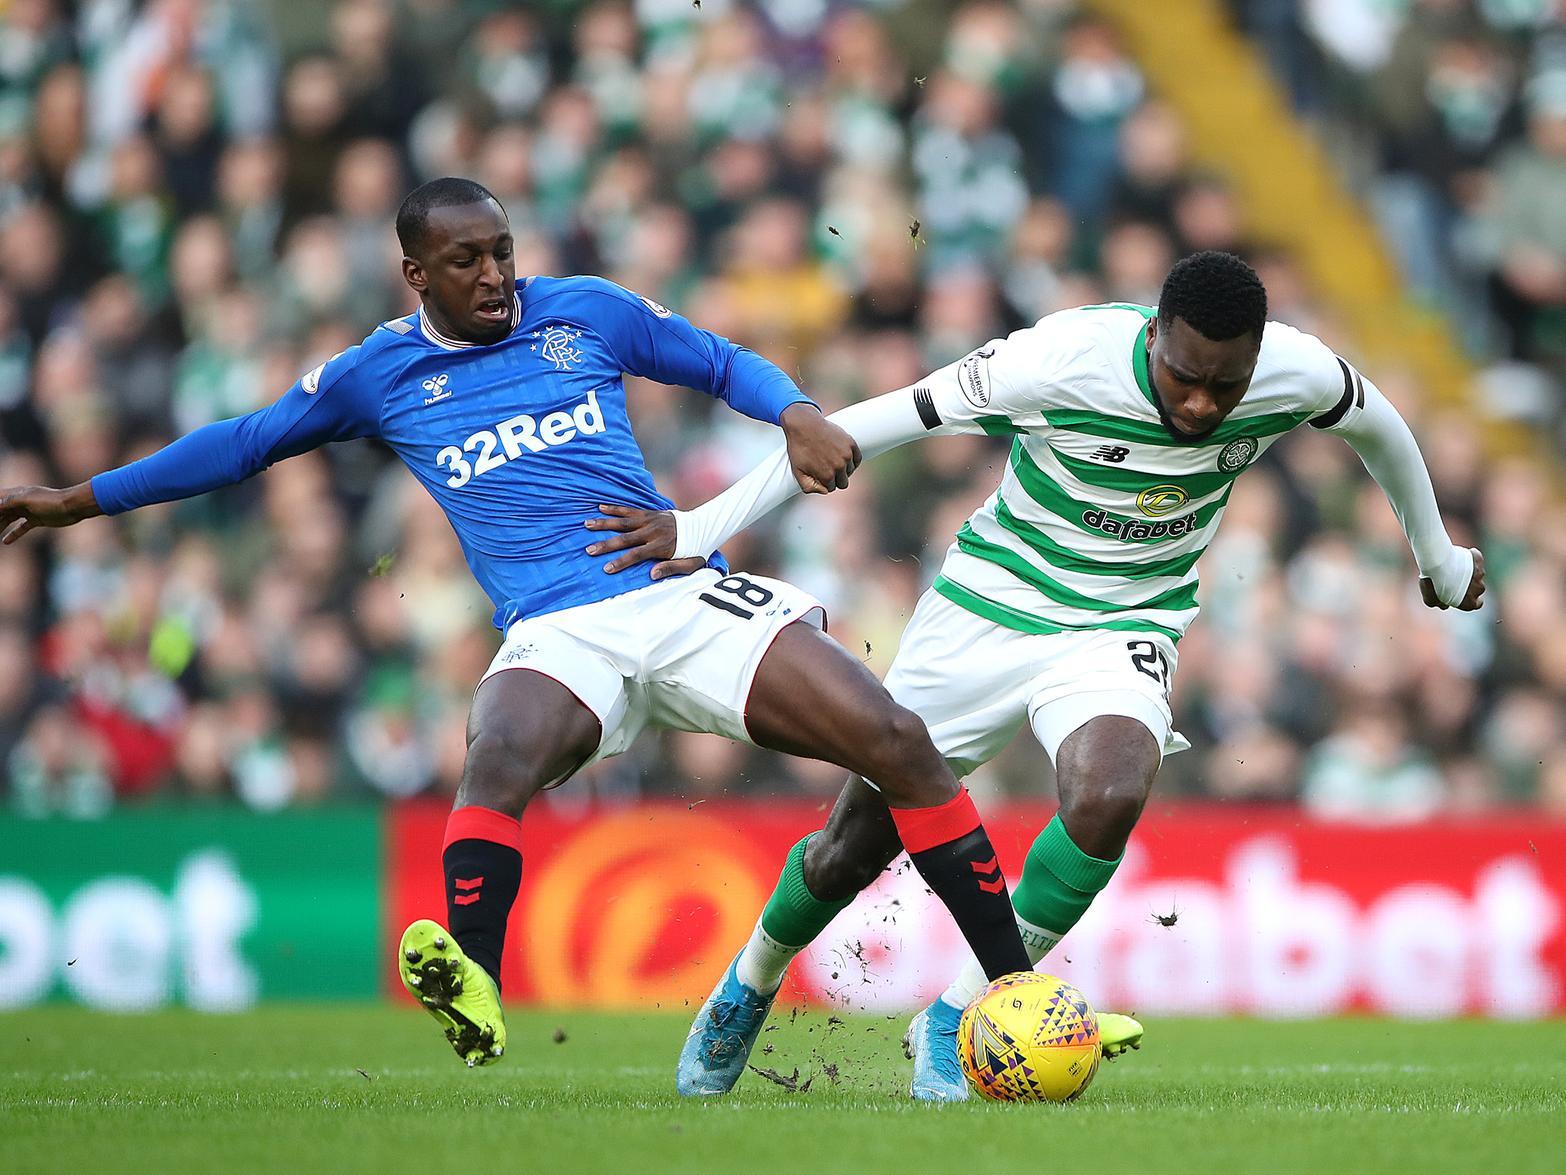 Aston Villa are said to be looking to beat Leeds United to the signing of Rangers midfielder Glen Kamara in January, with his asking price said to be around 8m. (Daily Mail)